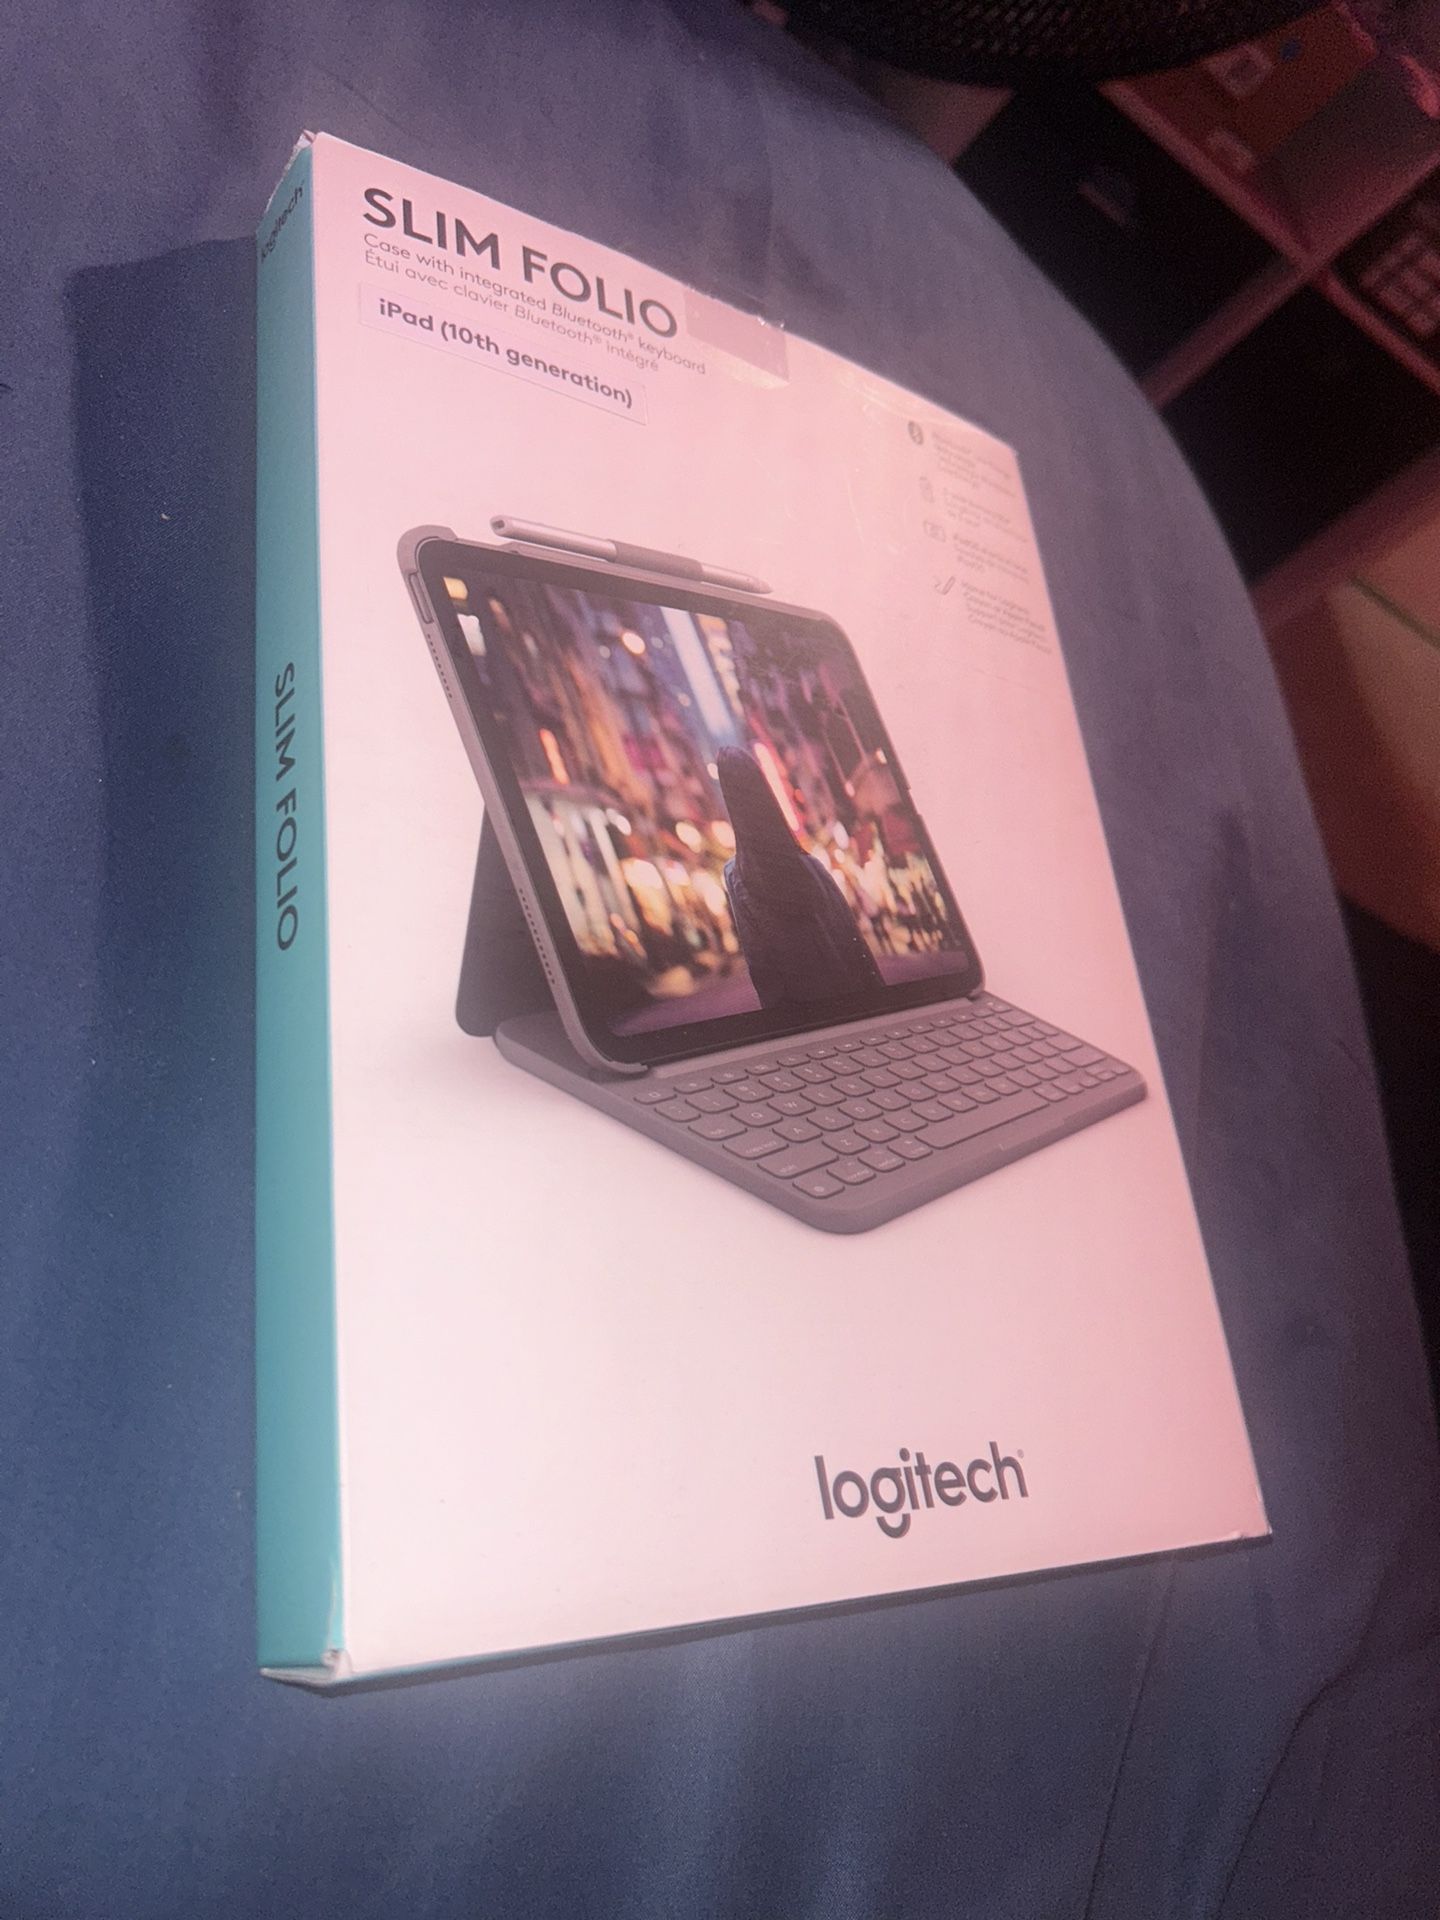 logitech case and keyboard for 10th gen iPad